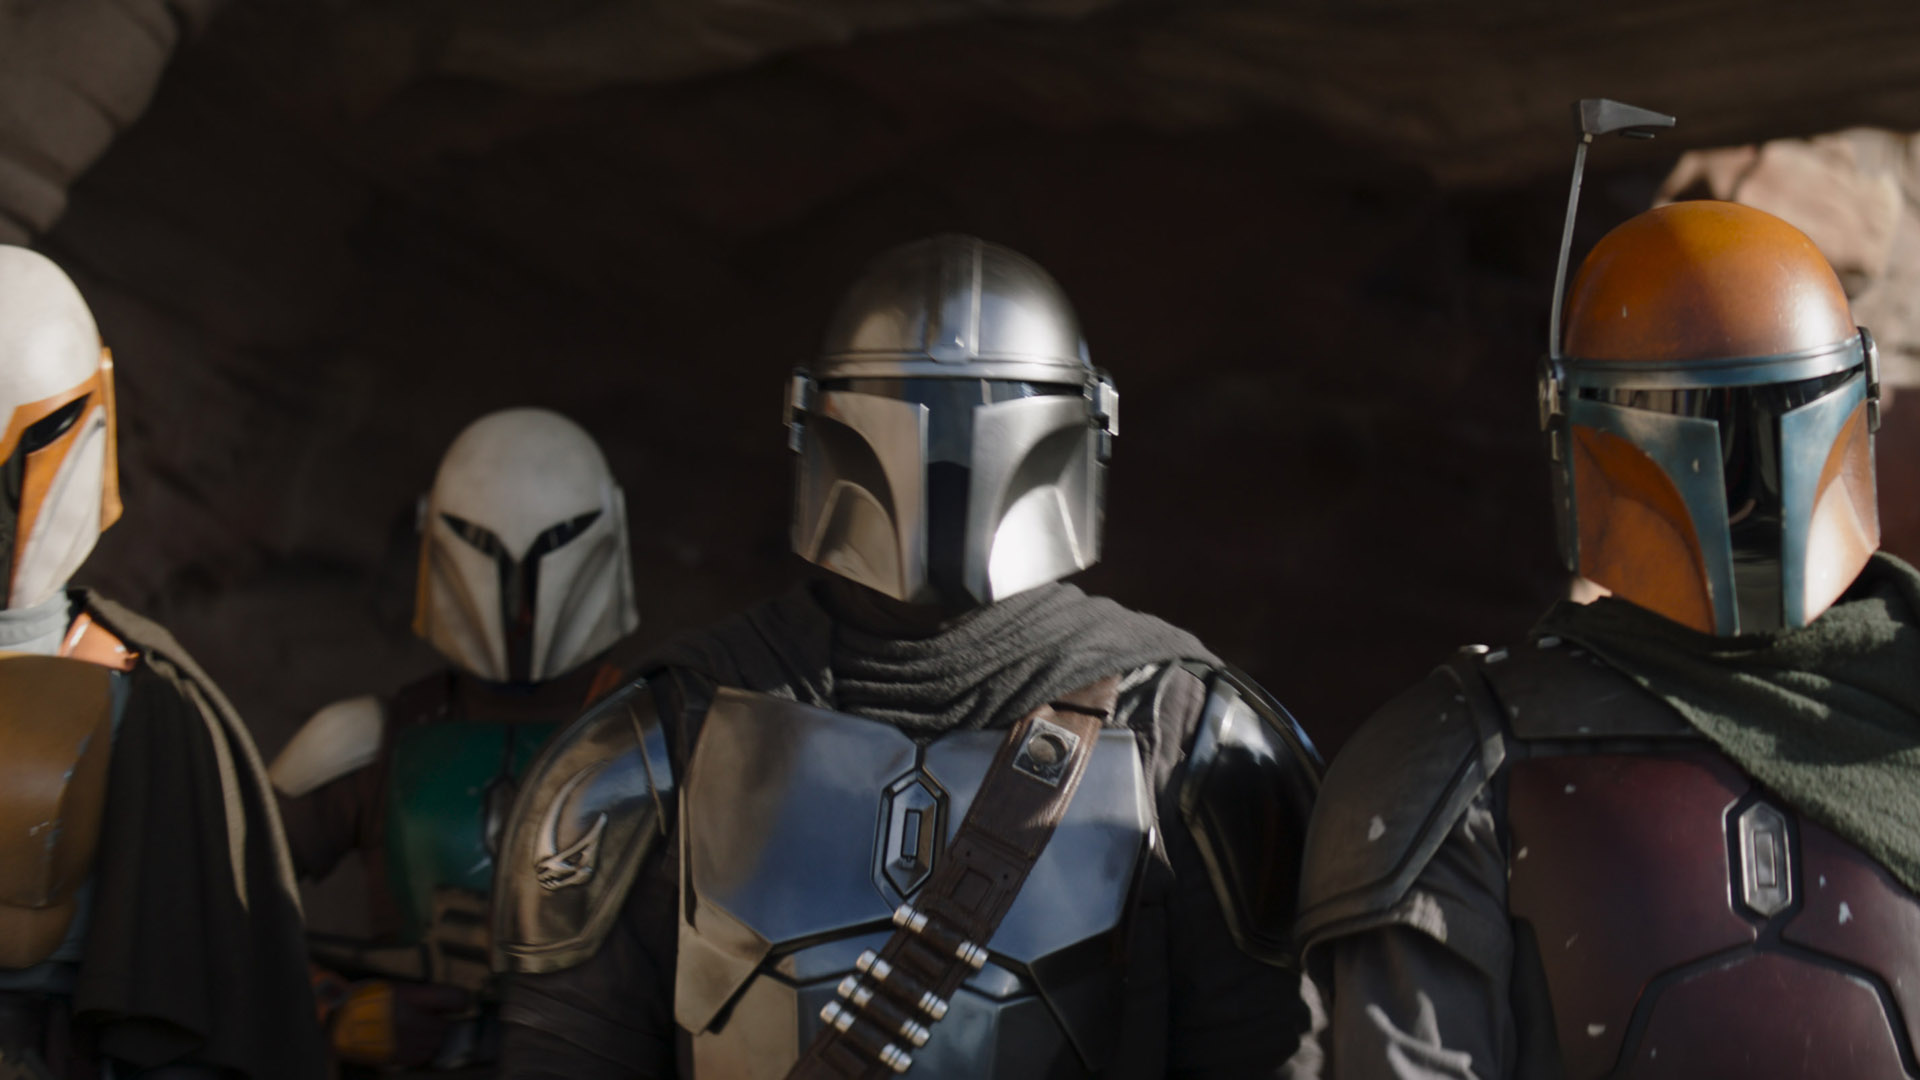 Din Djarin stands in a desert location looking at something off screen alongside his fellow Mandalorians in season 3